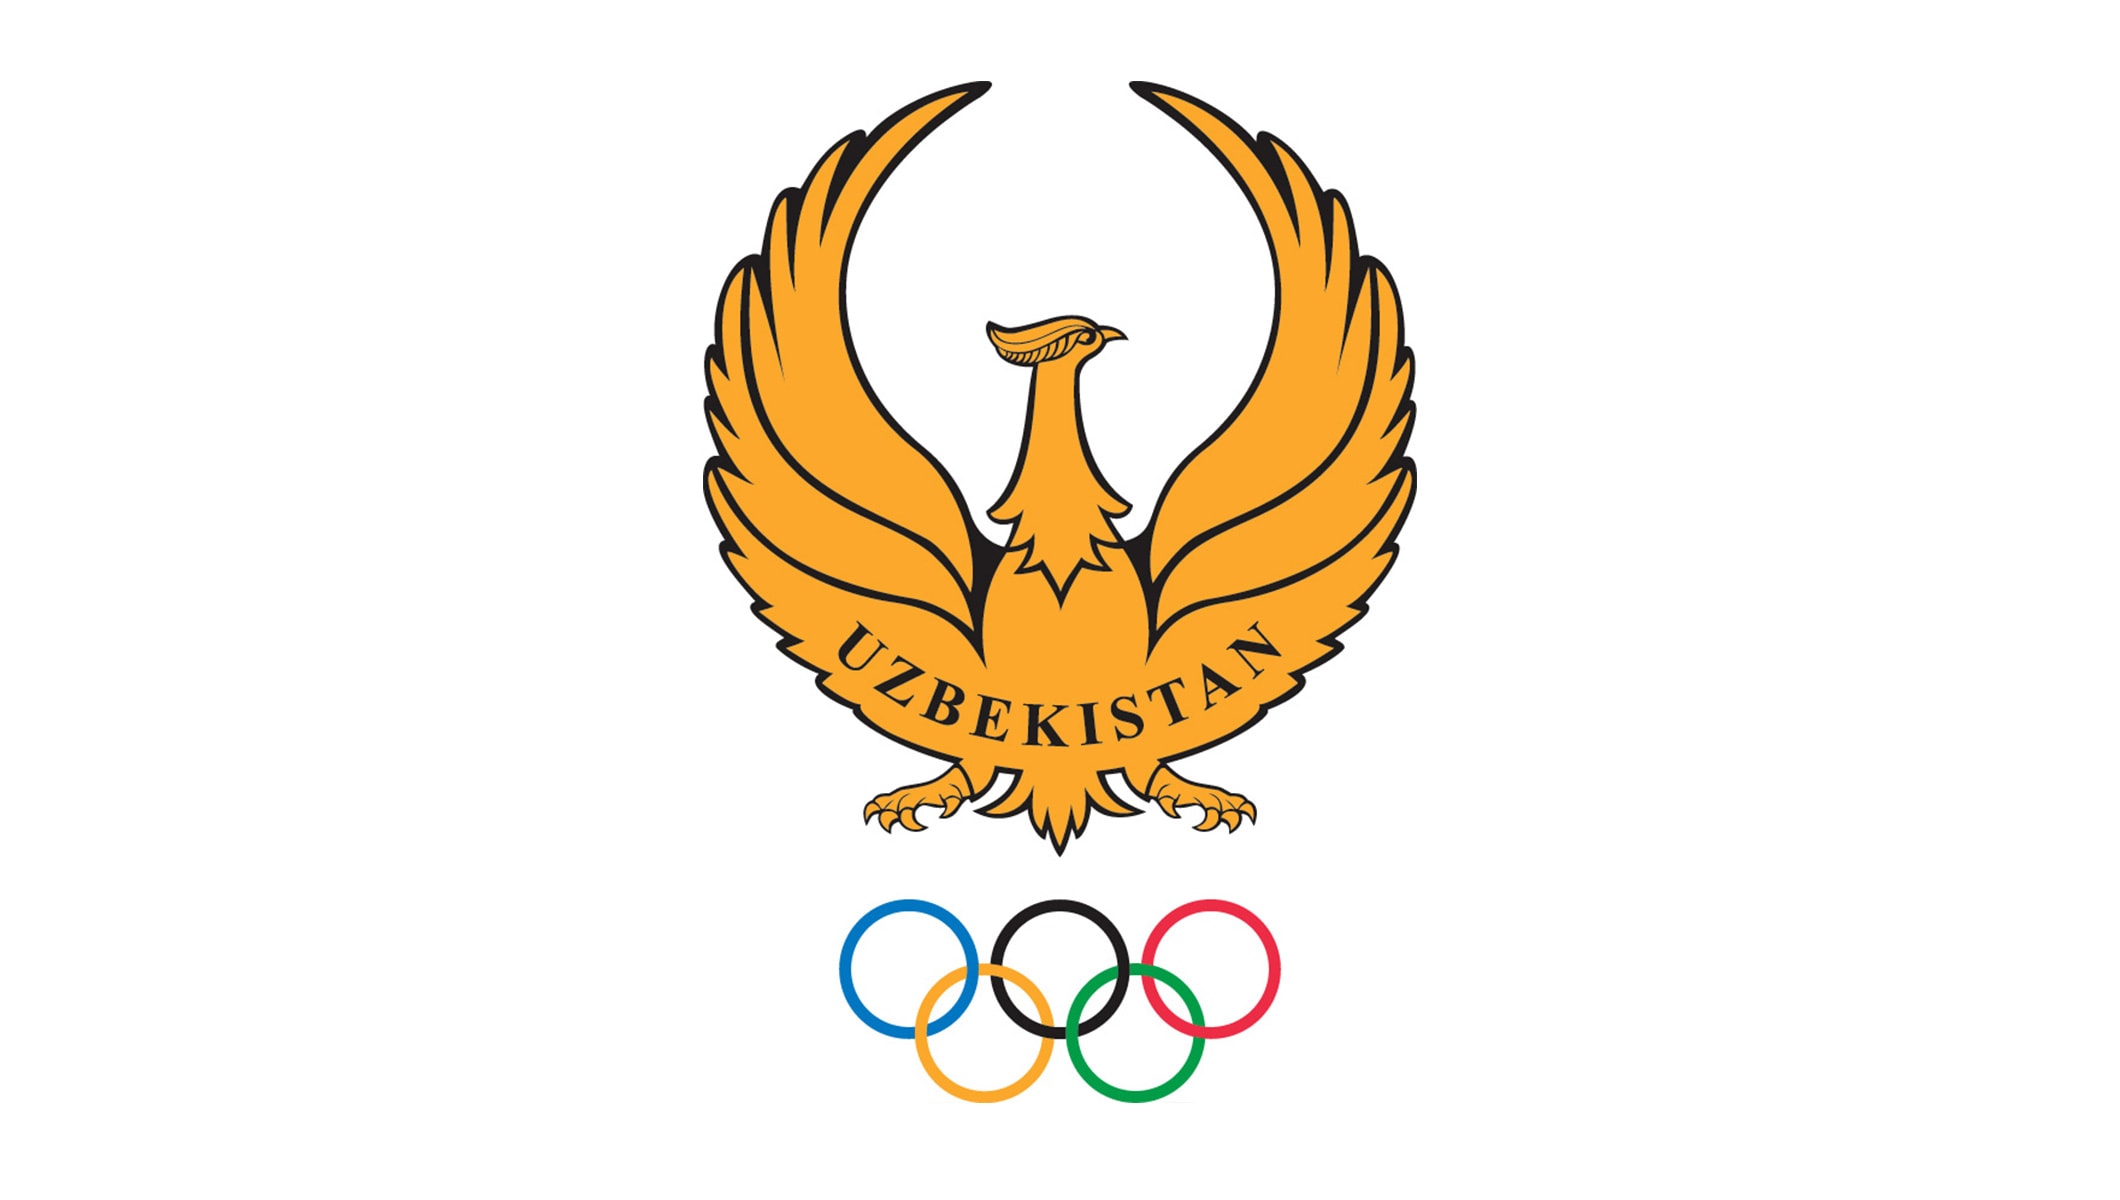 News From The National Olympic Committee Of The Republic Of Uzbekistan Olympic News